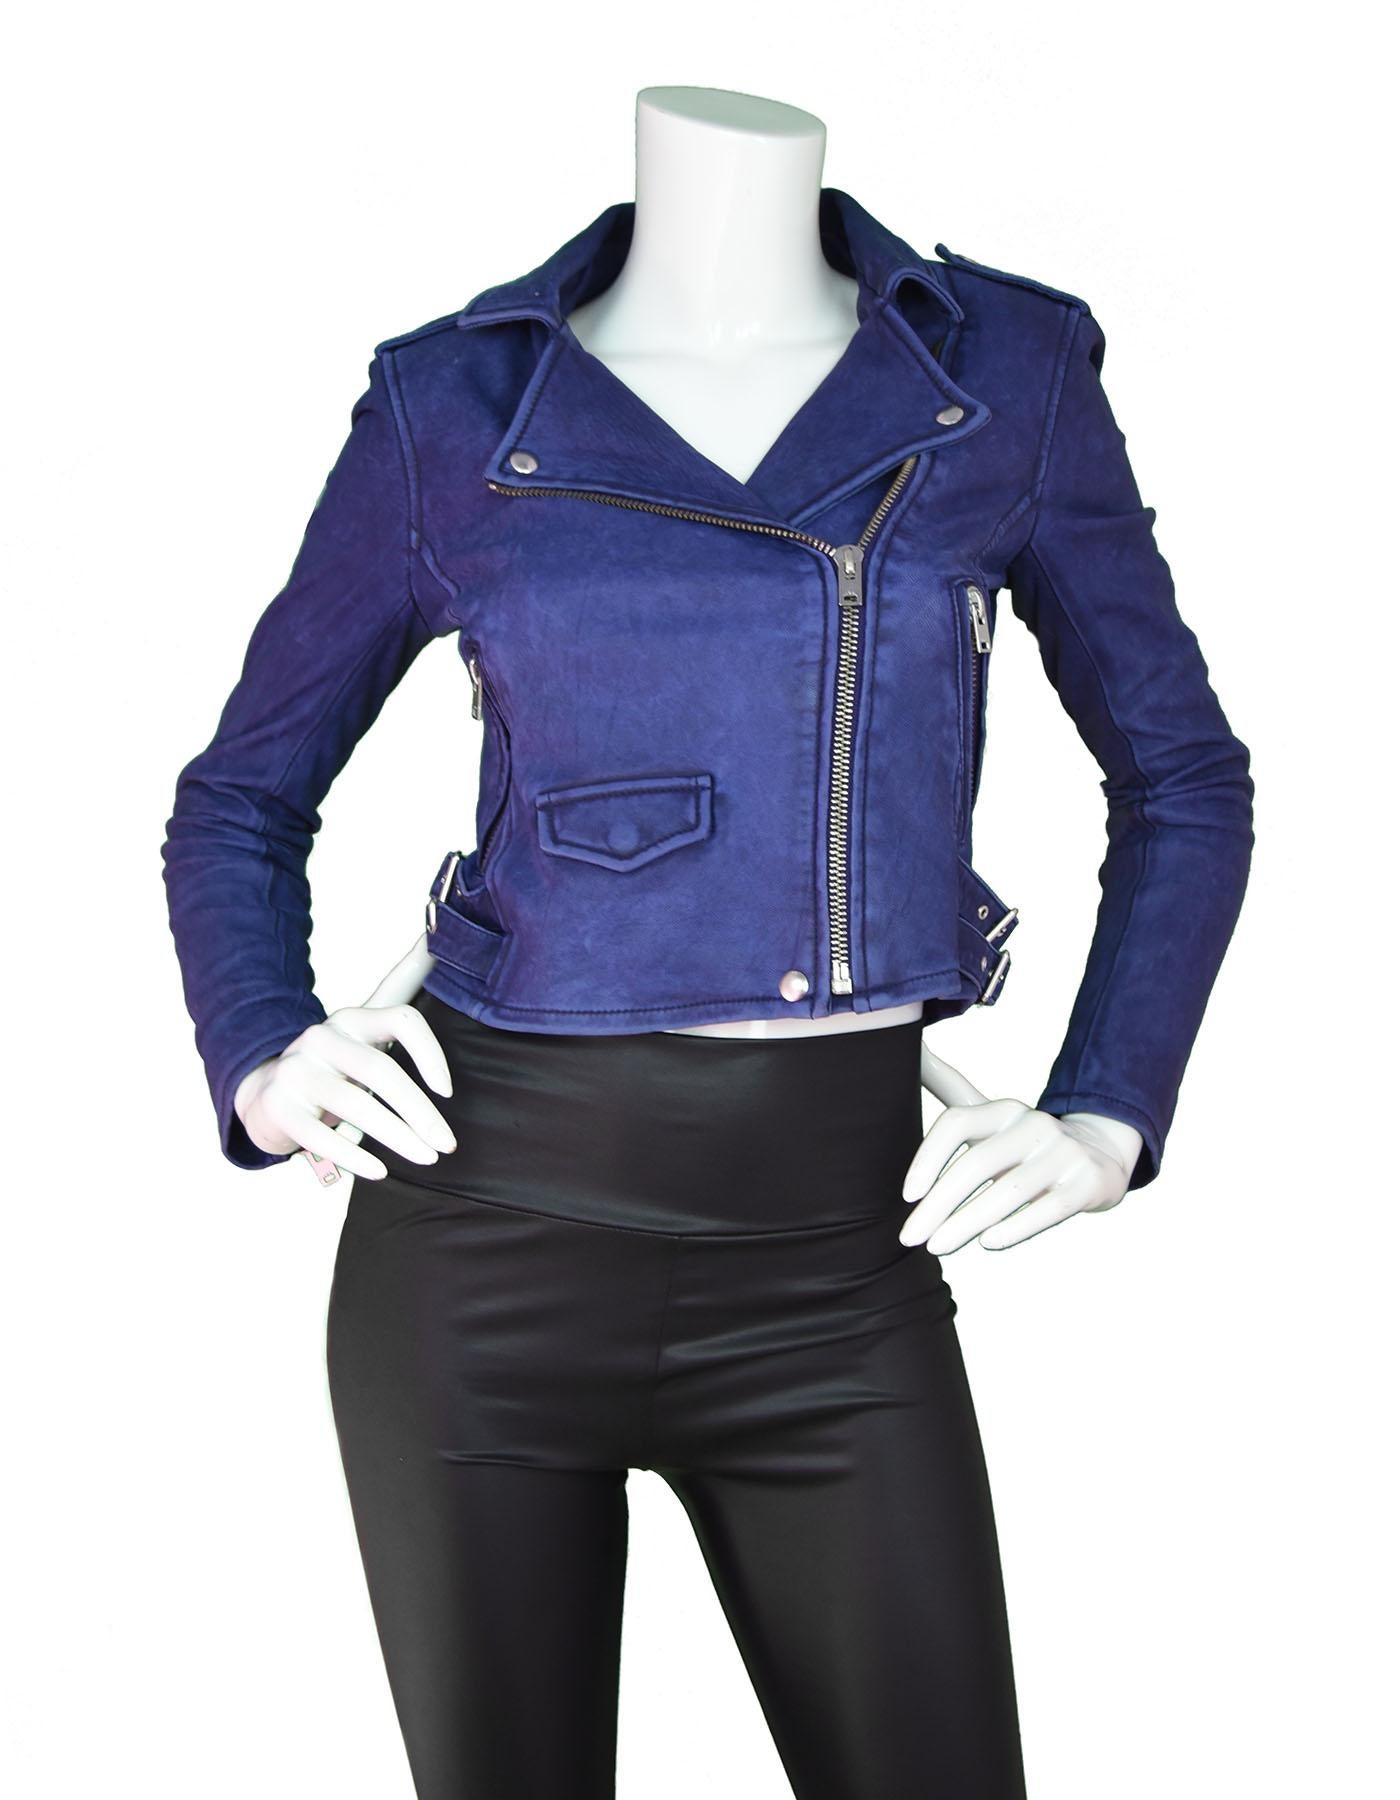 IRO Indigo Leather Ashville Moto Jacket Sz FR36 NWT

Made In: China
Color: Distressed Indigo (blue/purple)
Composition: 100% Lamb leather
Closure/Opening: Front zip 
Exterior Pockets: Side zip pockets
Interior Pockets: None
Retail Price: $1,200 +